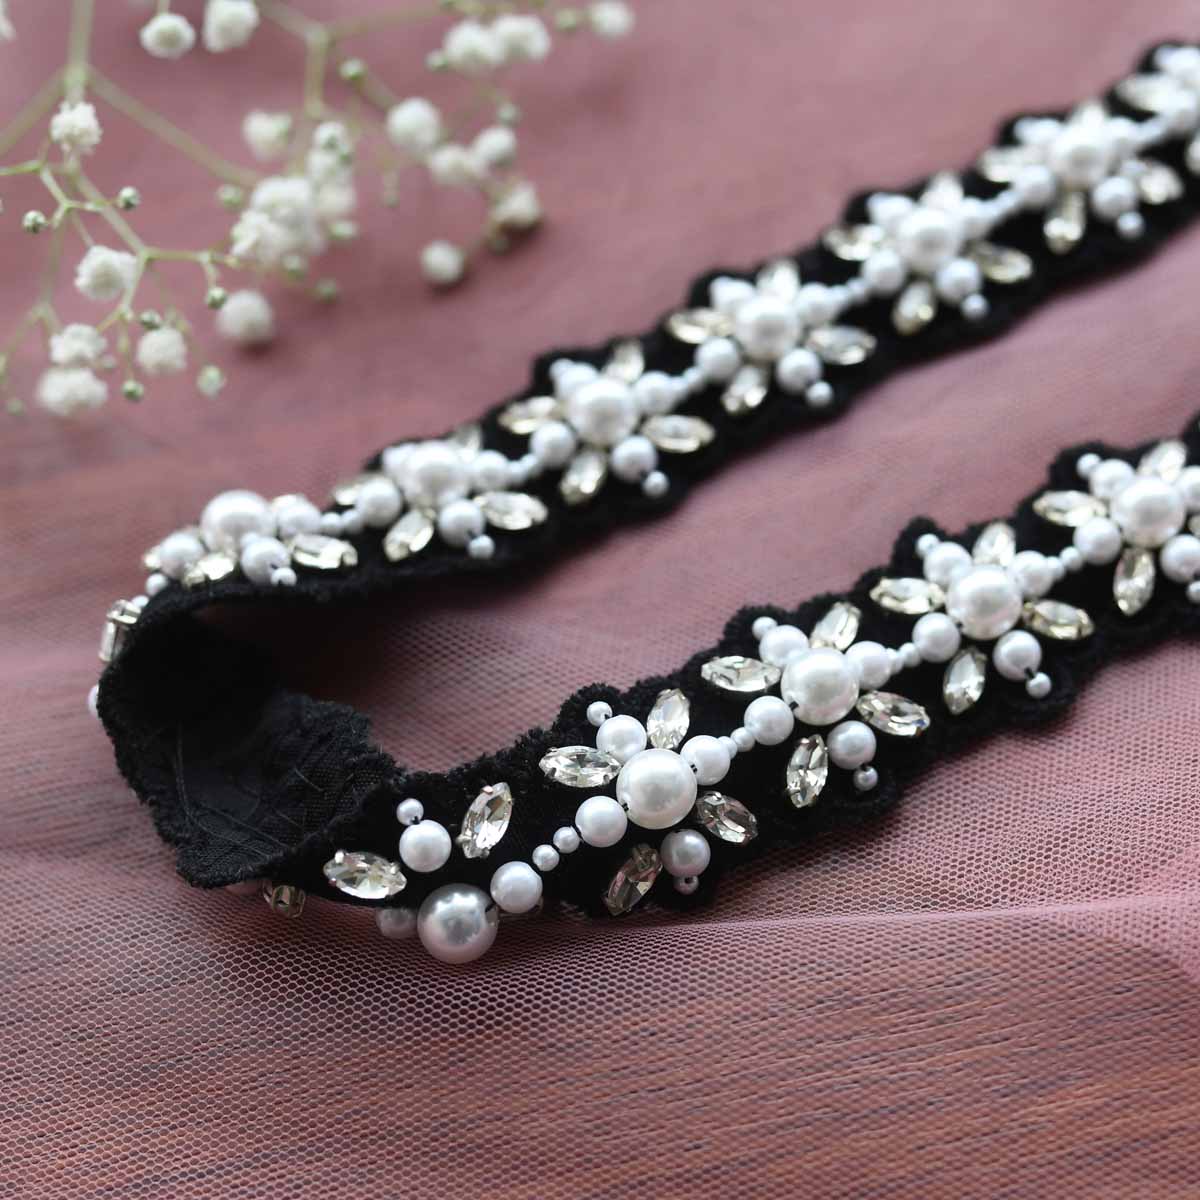 Embroidered Tie up Headband with Crystal Flowers